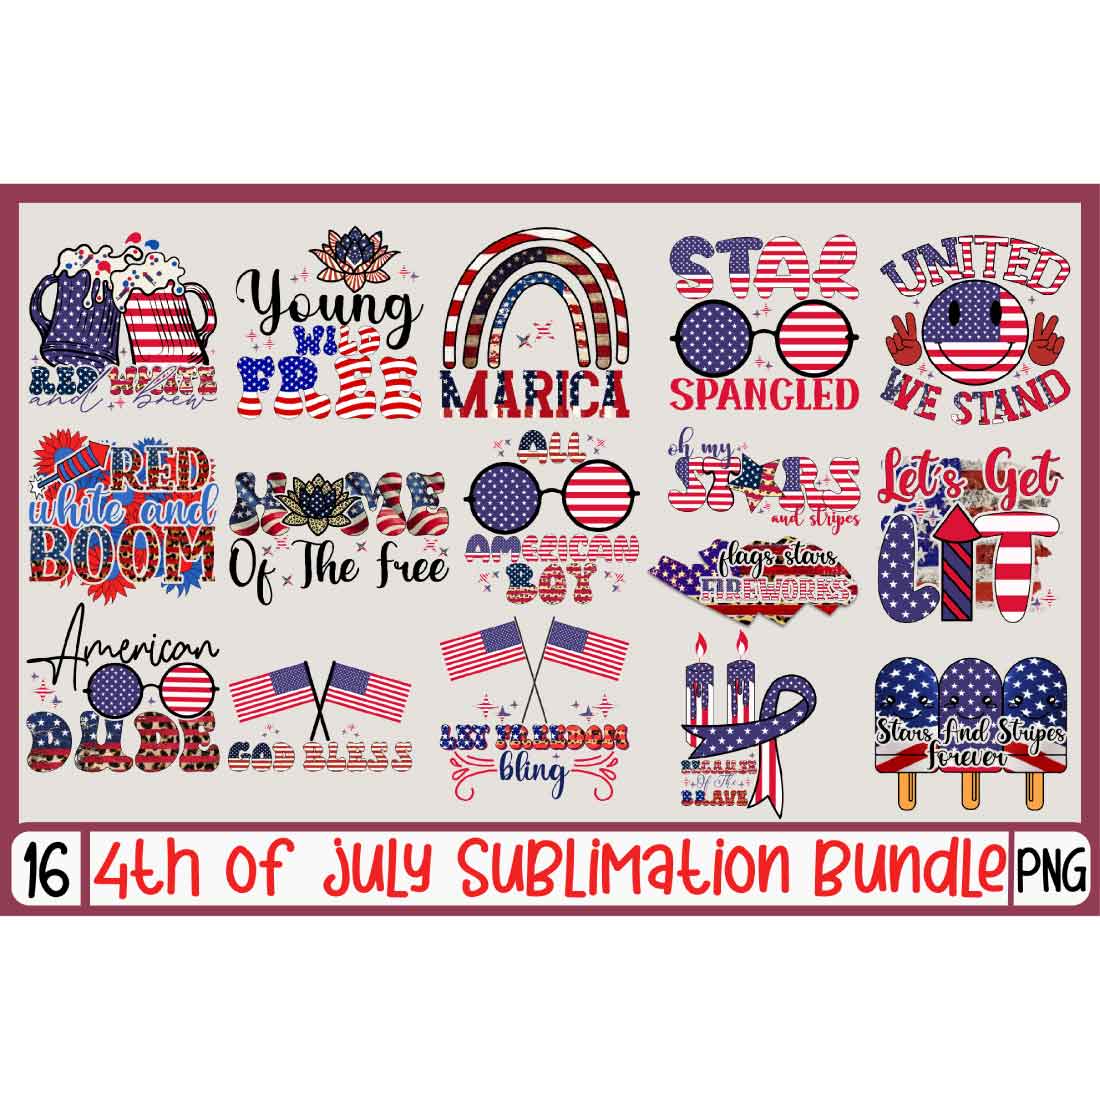 4th Of July Sublimation Bundle cover image.